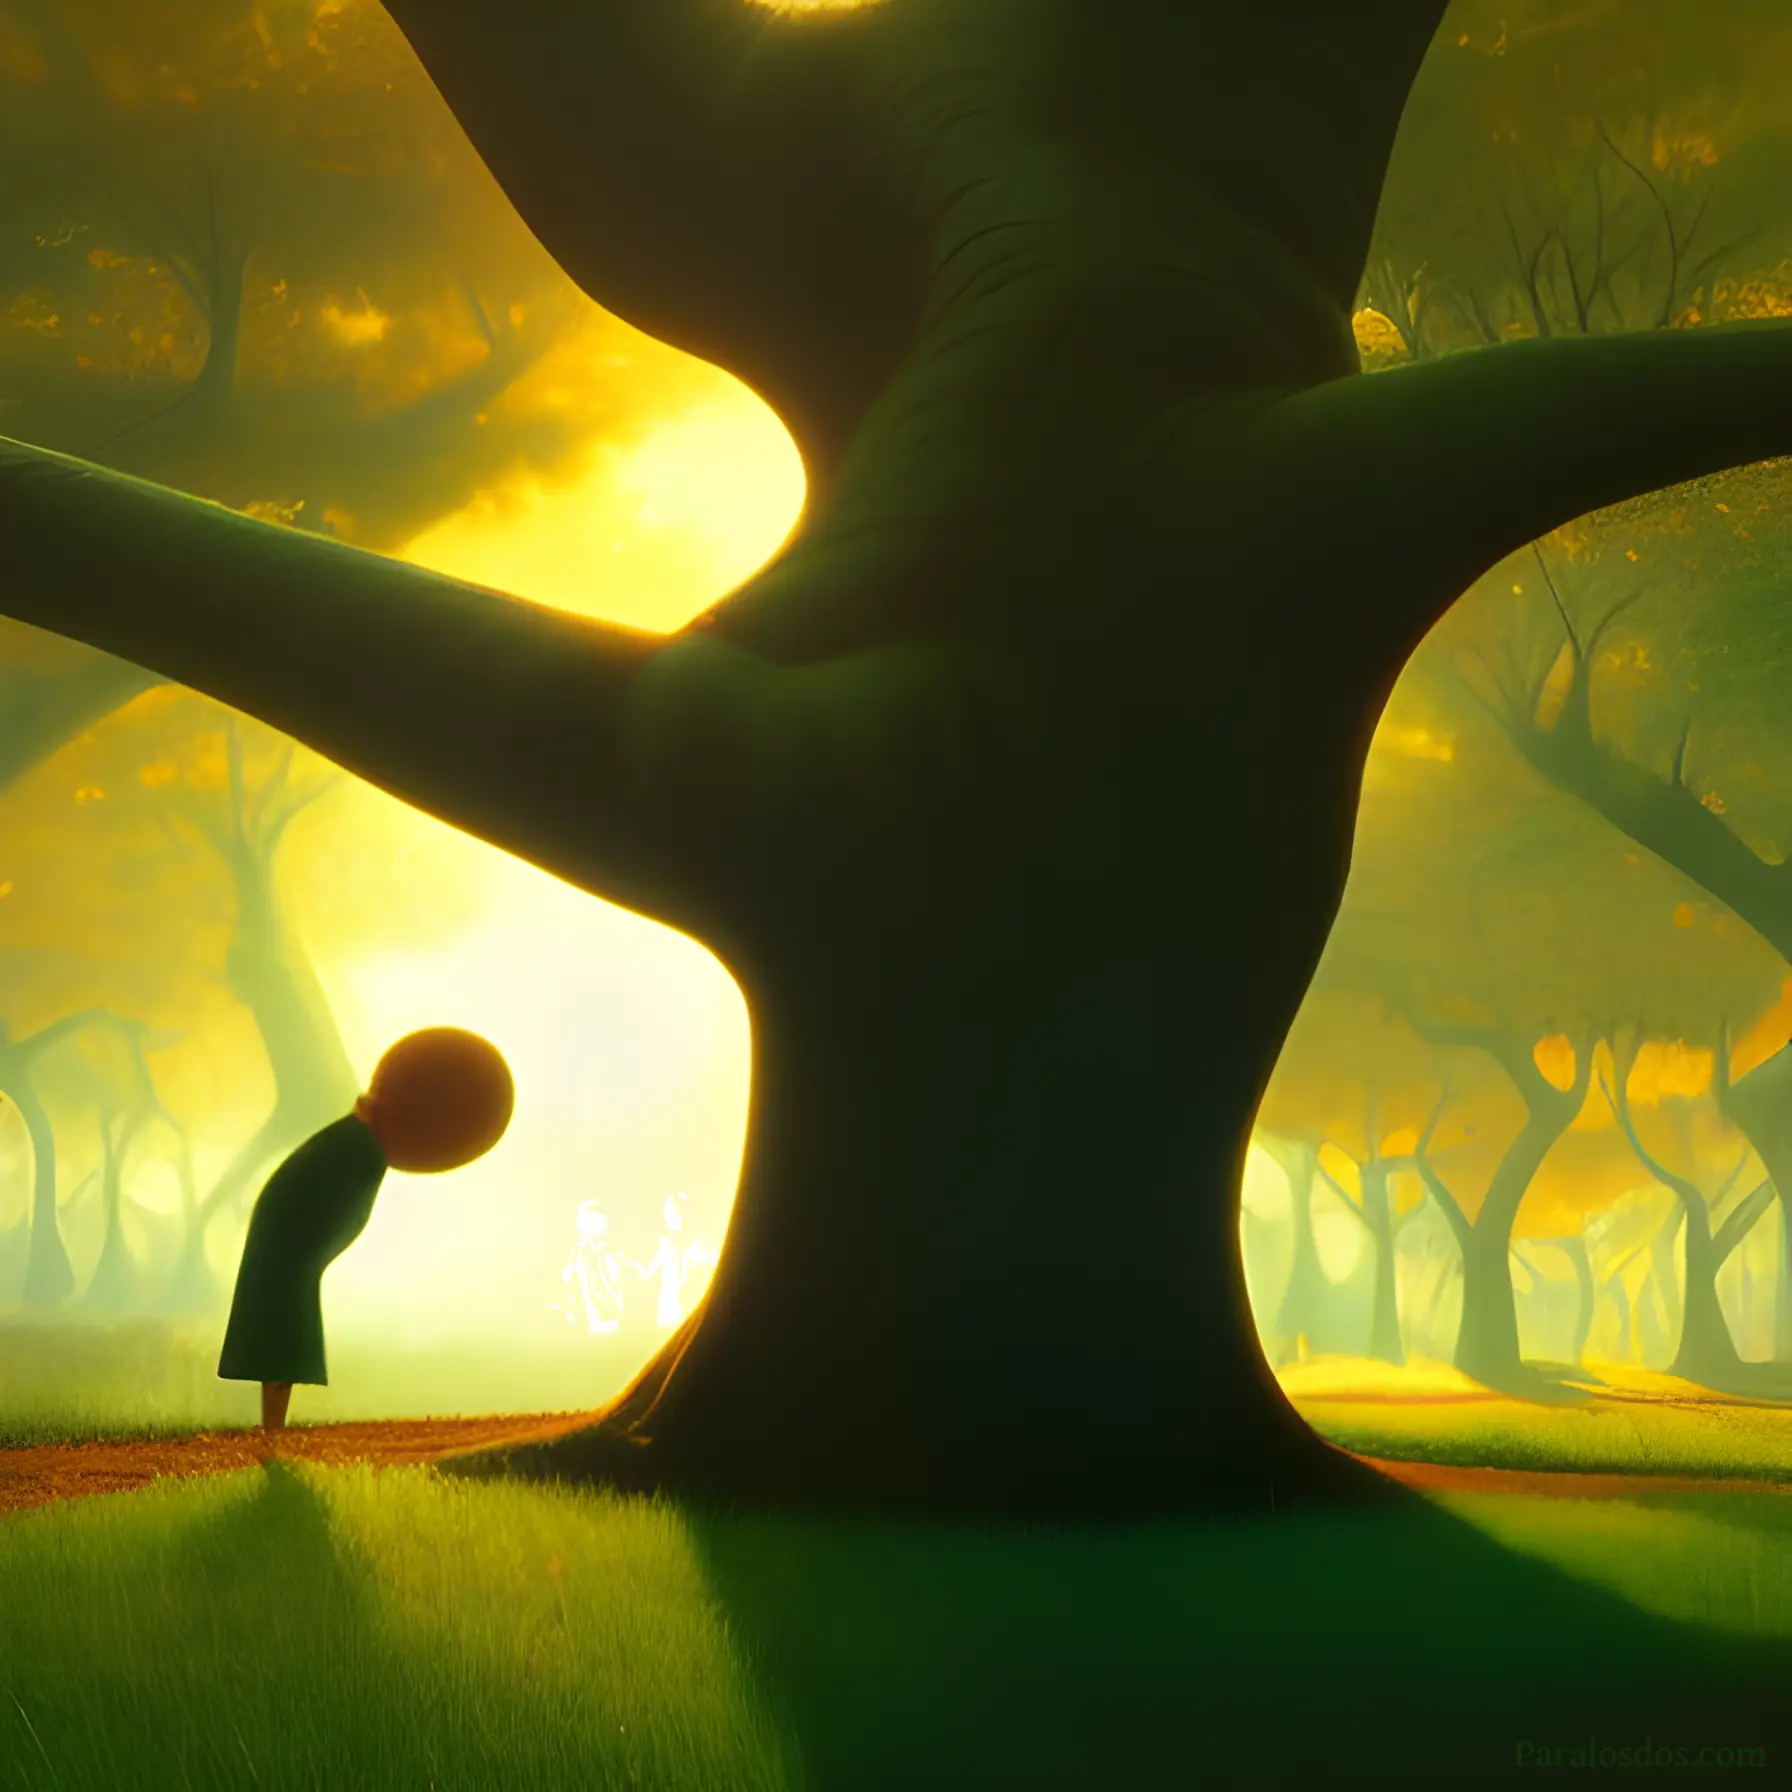 An artistic rendering of a figure bowing before a large, old tree.